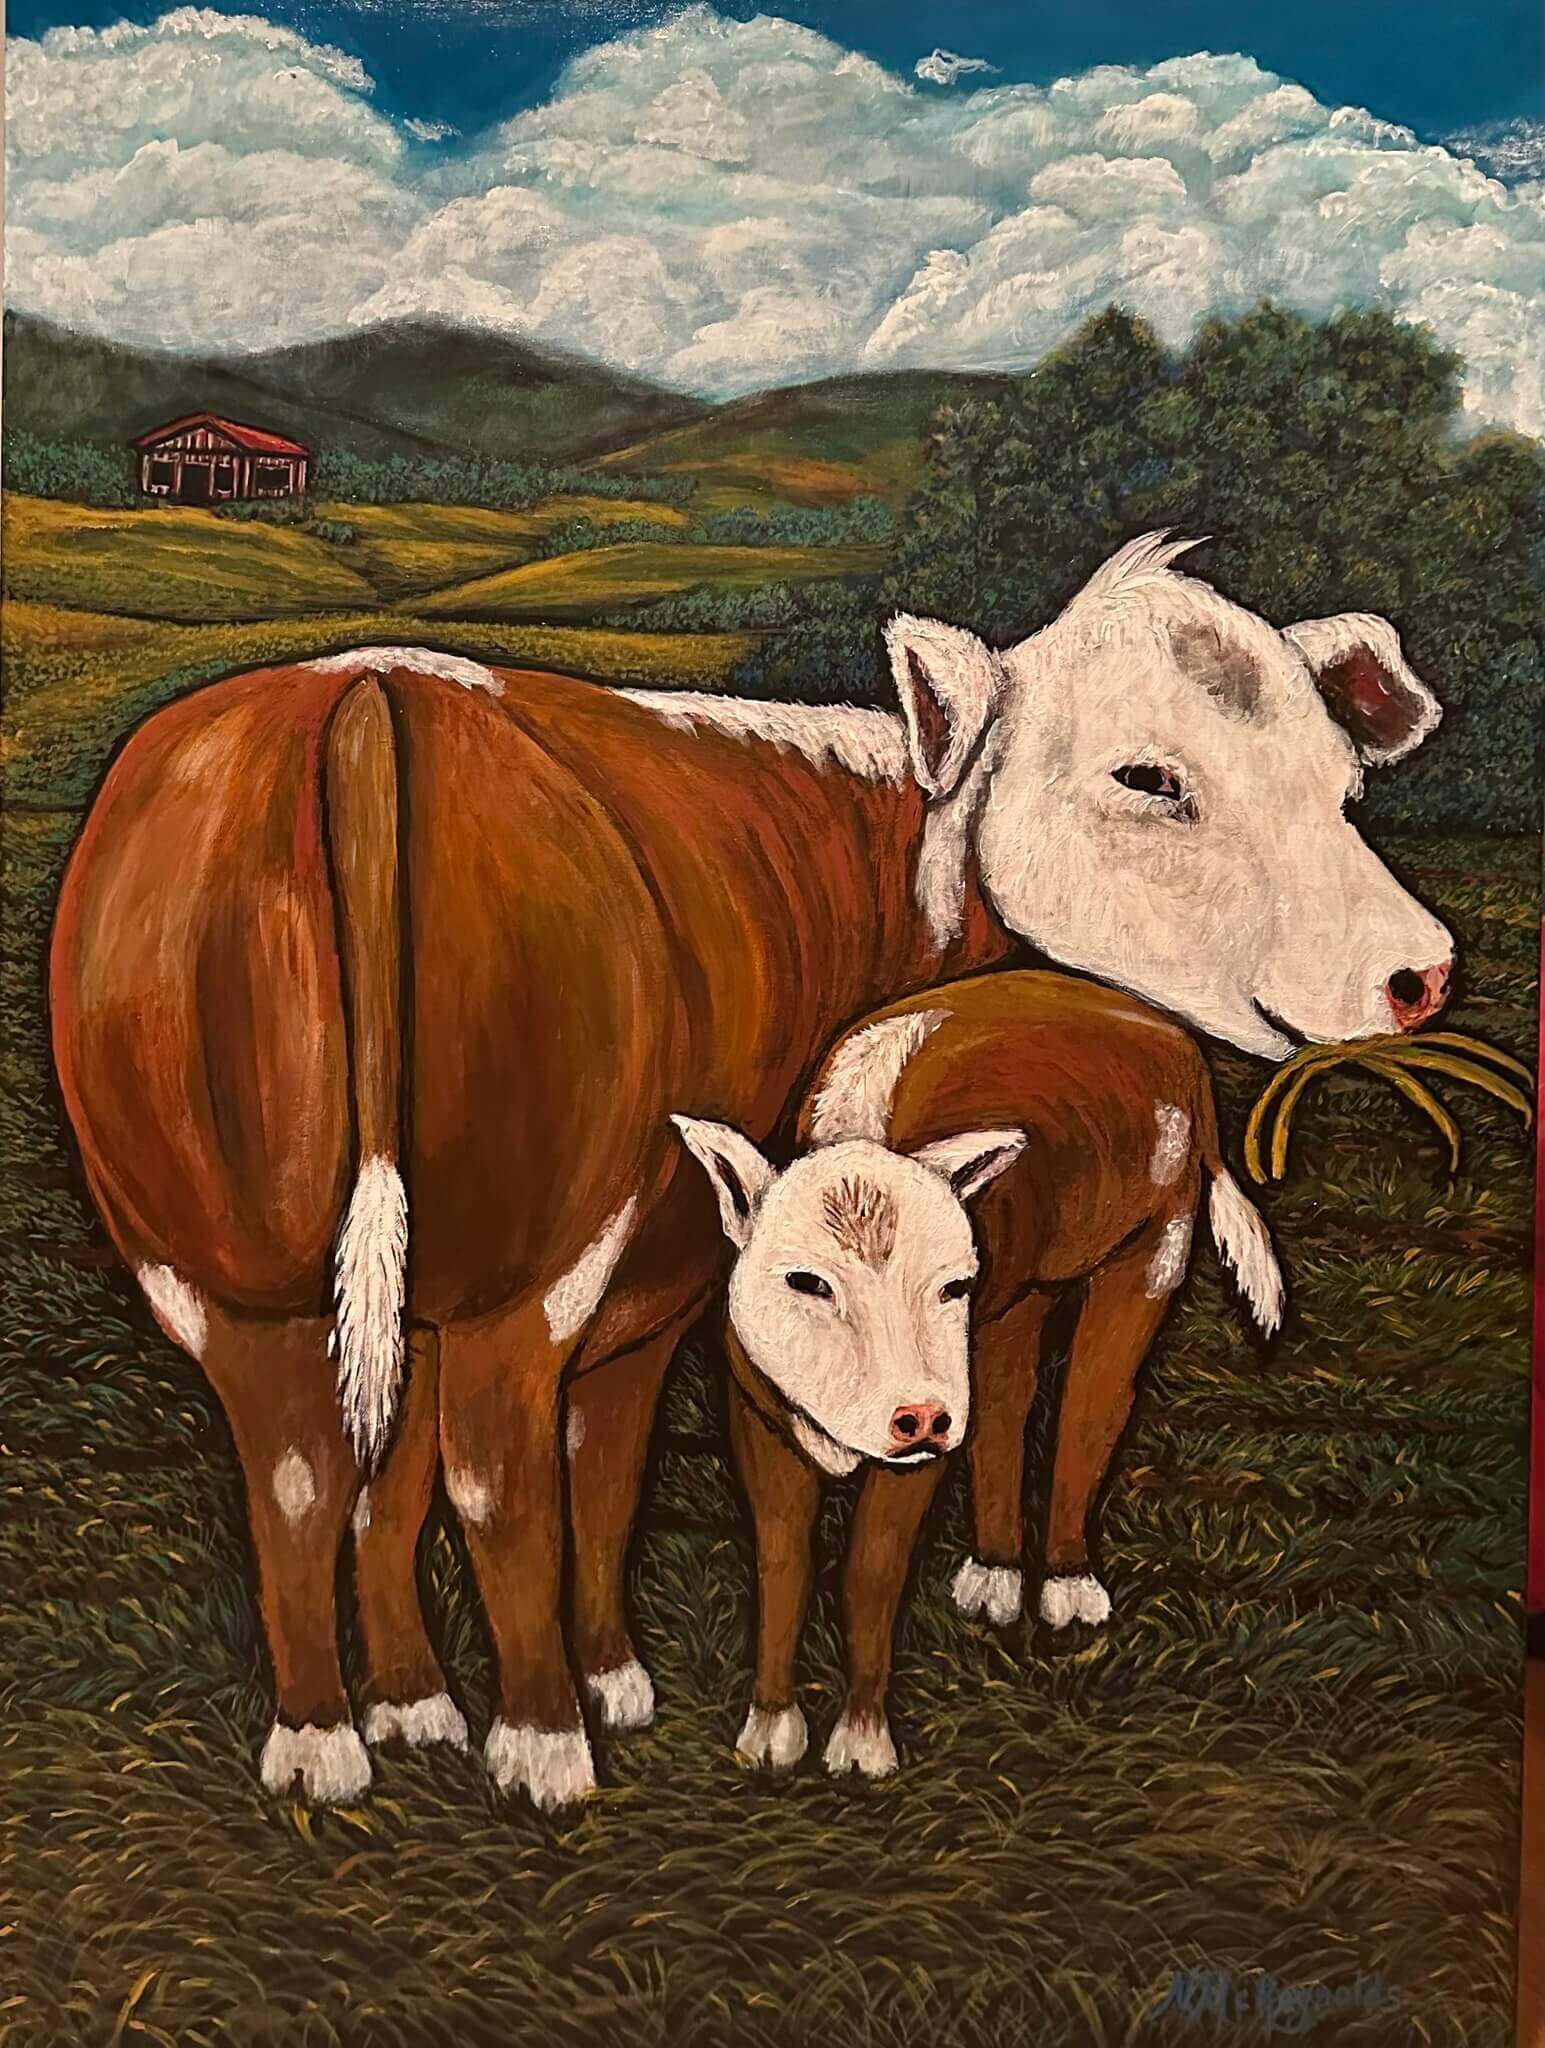 A mother cow standing over her child